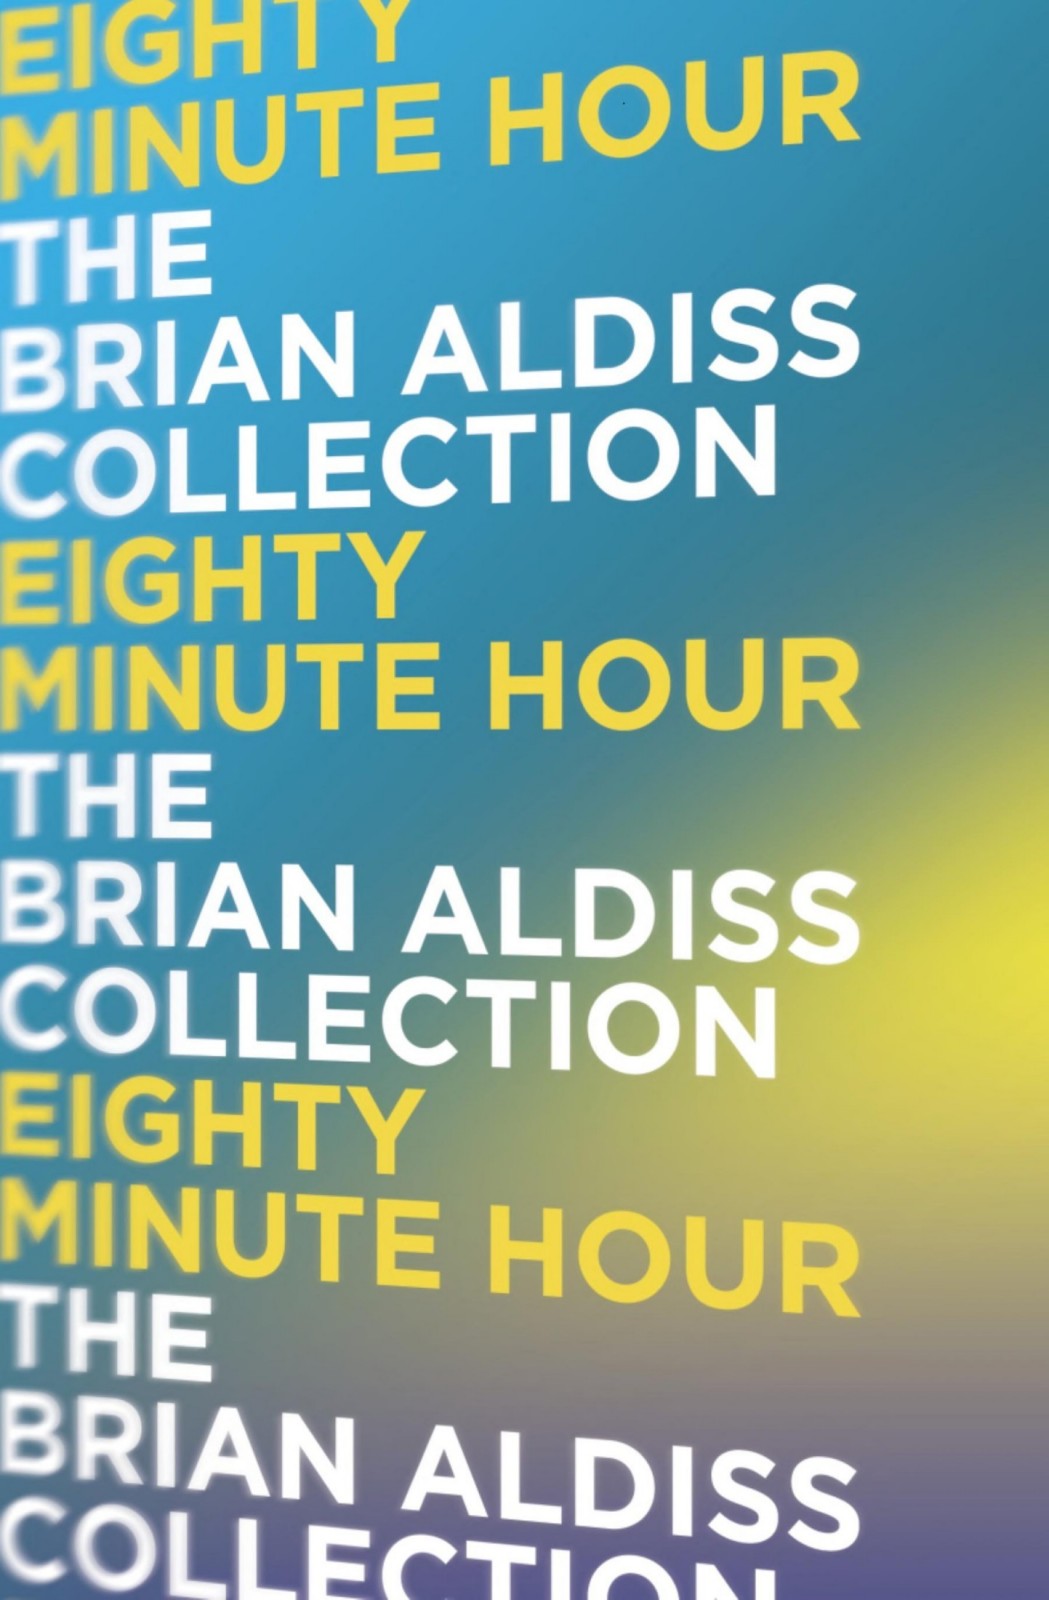 The Eighty-Minute Hour